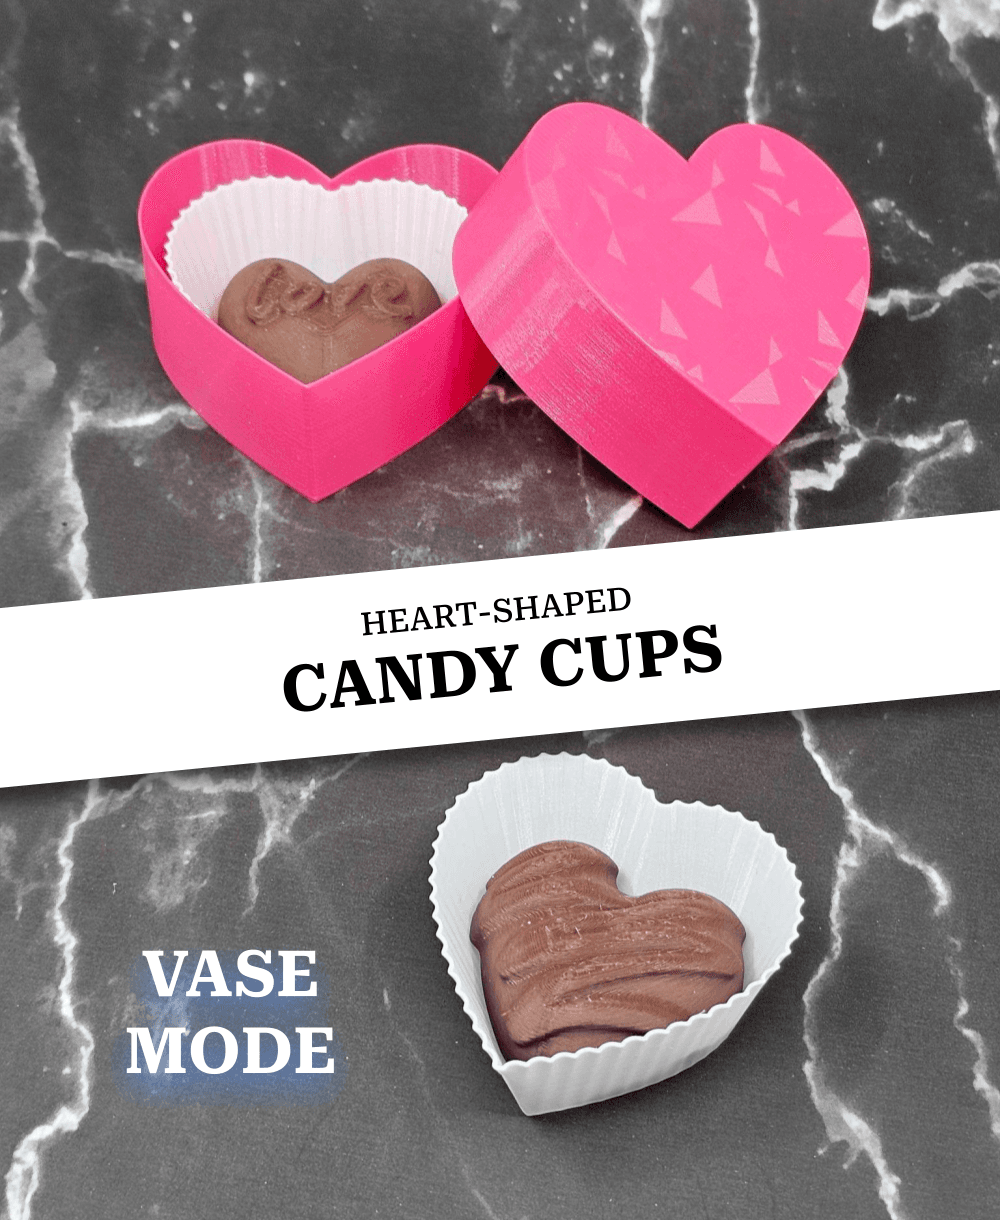 Heart-shaped candy cups (Spiral vase mode) | #Valentines chocolates 3d model